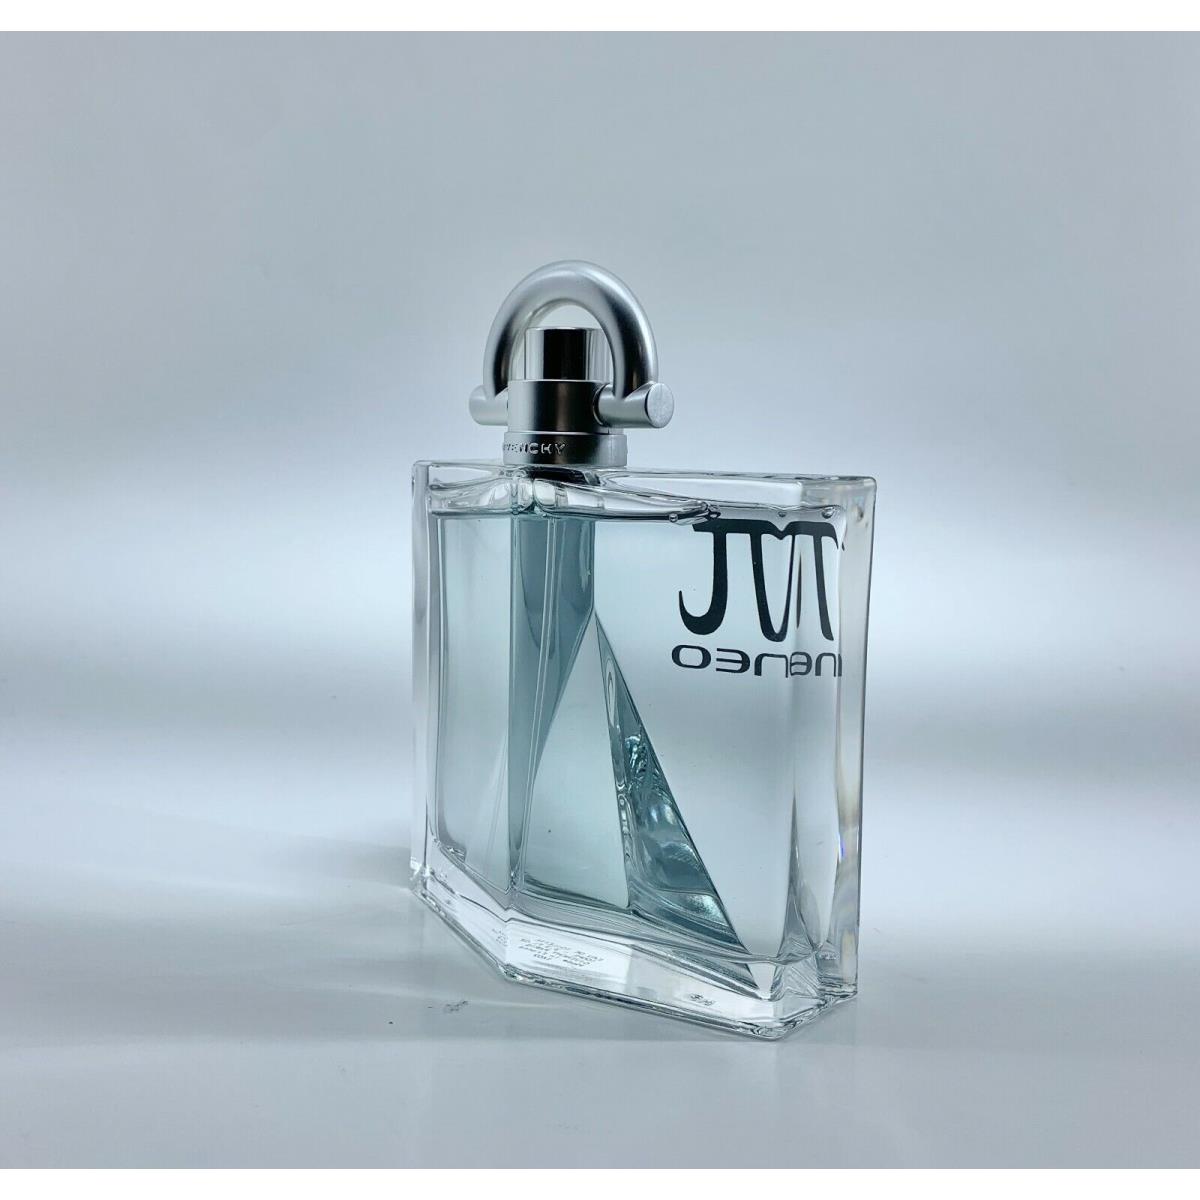 PI Neo Givenchy by Givenchy Edt Cologne For Men  oz - Givenchy perfumes  - 085723355477 | Fash Brands